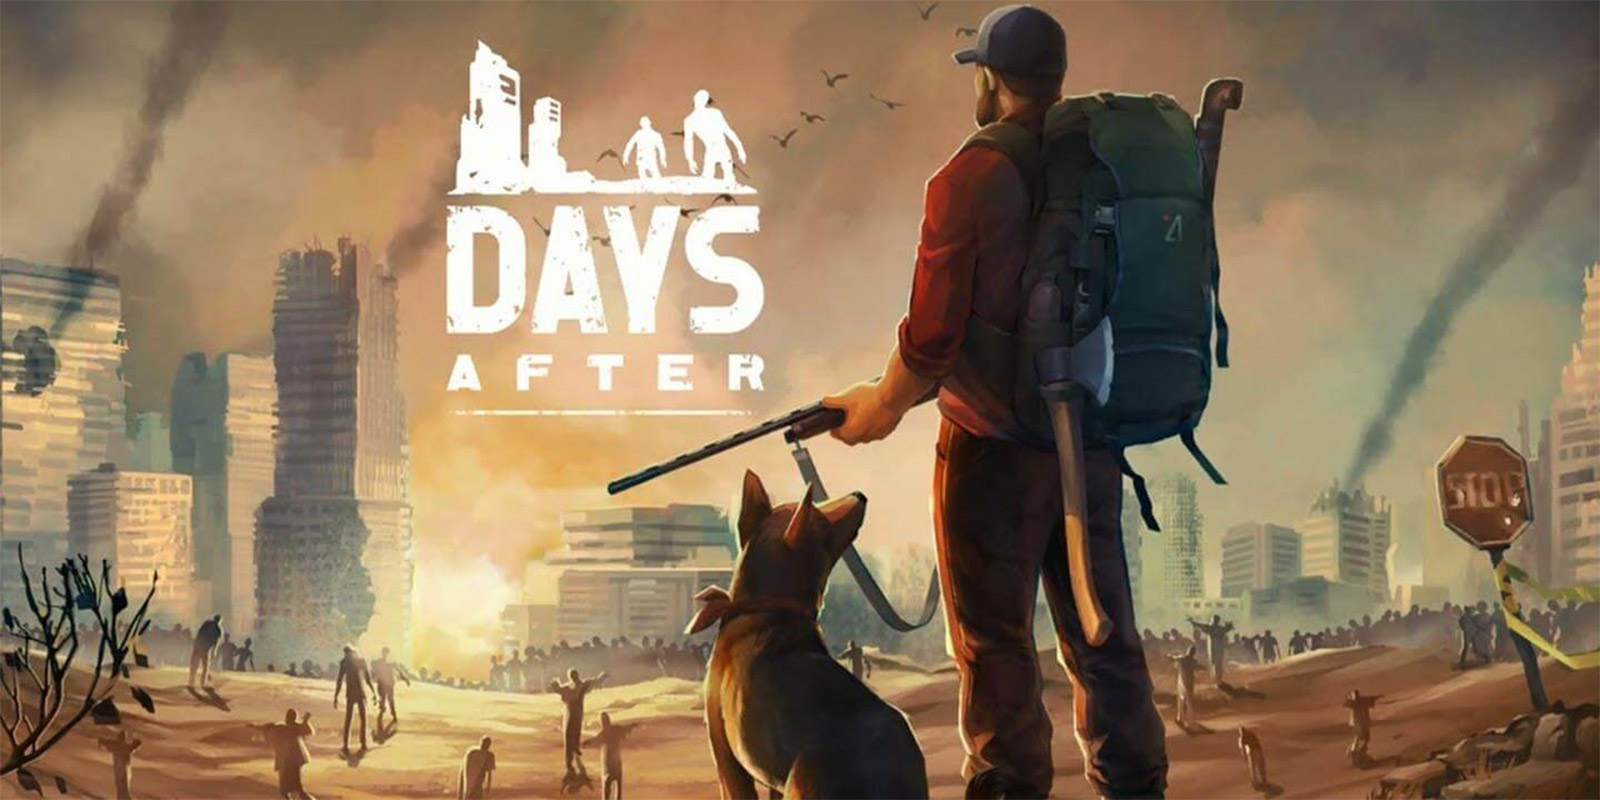 Игра games days. Days after игра. Days after зомби апокалипсис. Days after Zombie Survival. Day after Day игра.